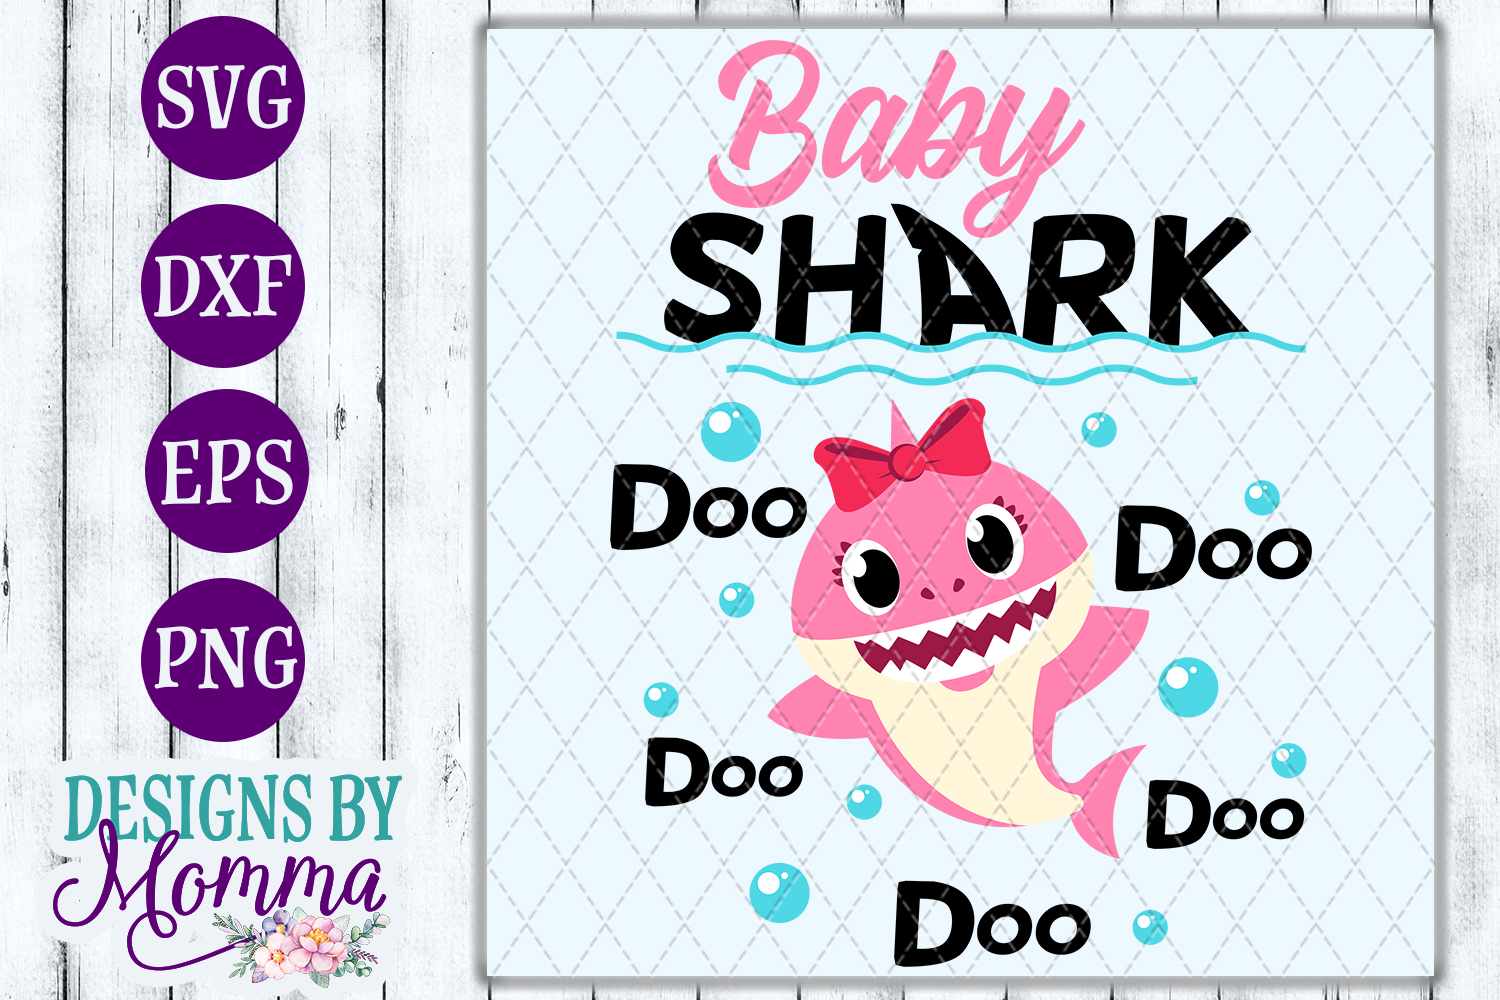 Download Svg clipart download baby shark pictures on Cliparts Pub ...